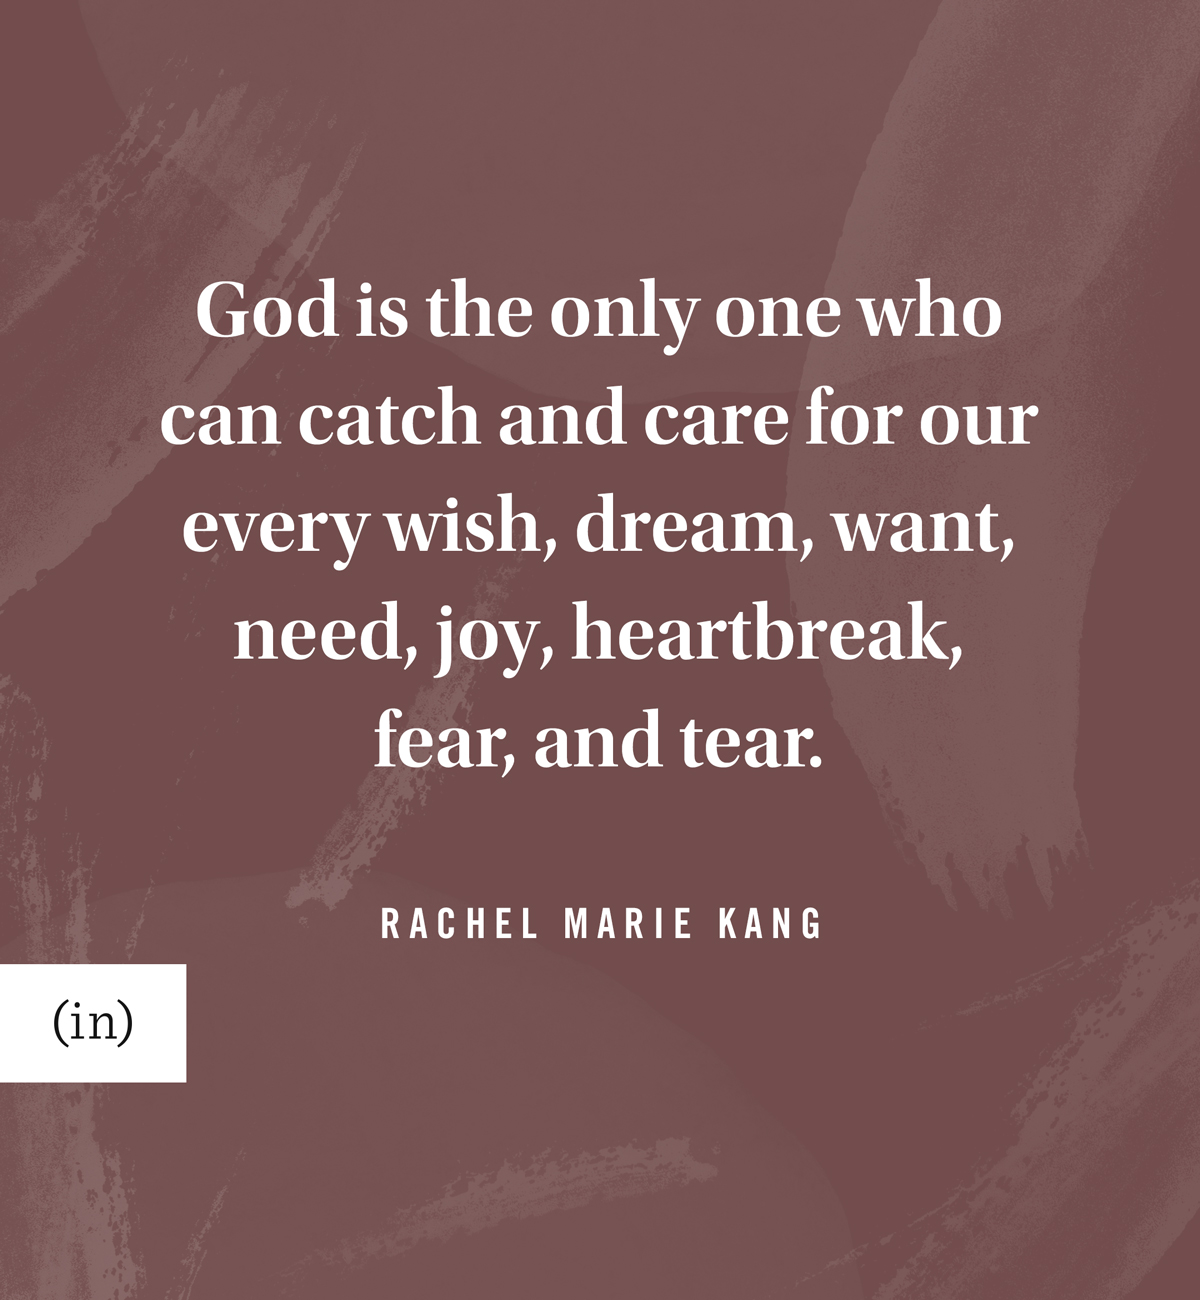 God is the only one who can catch and care for our every wish, dream, want, need, joy, heartbreak, fear, and tear. -Rachel Marie Kang